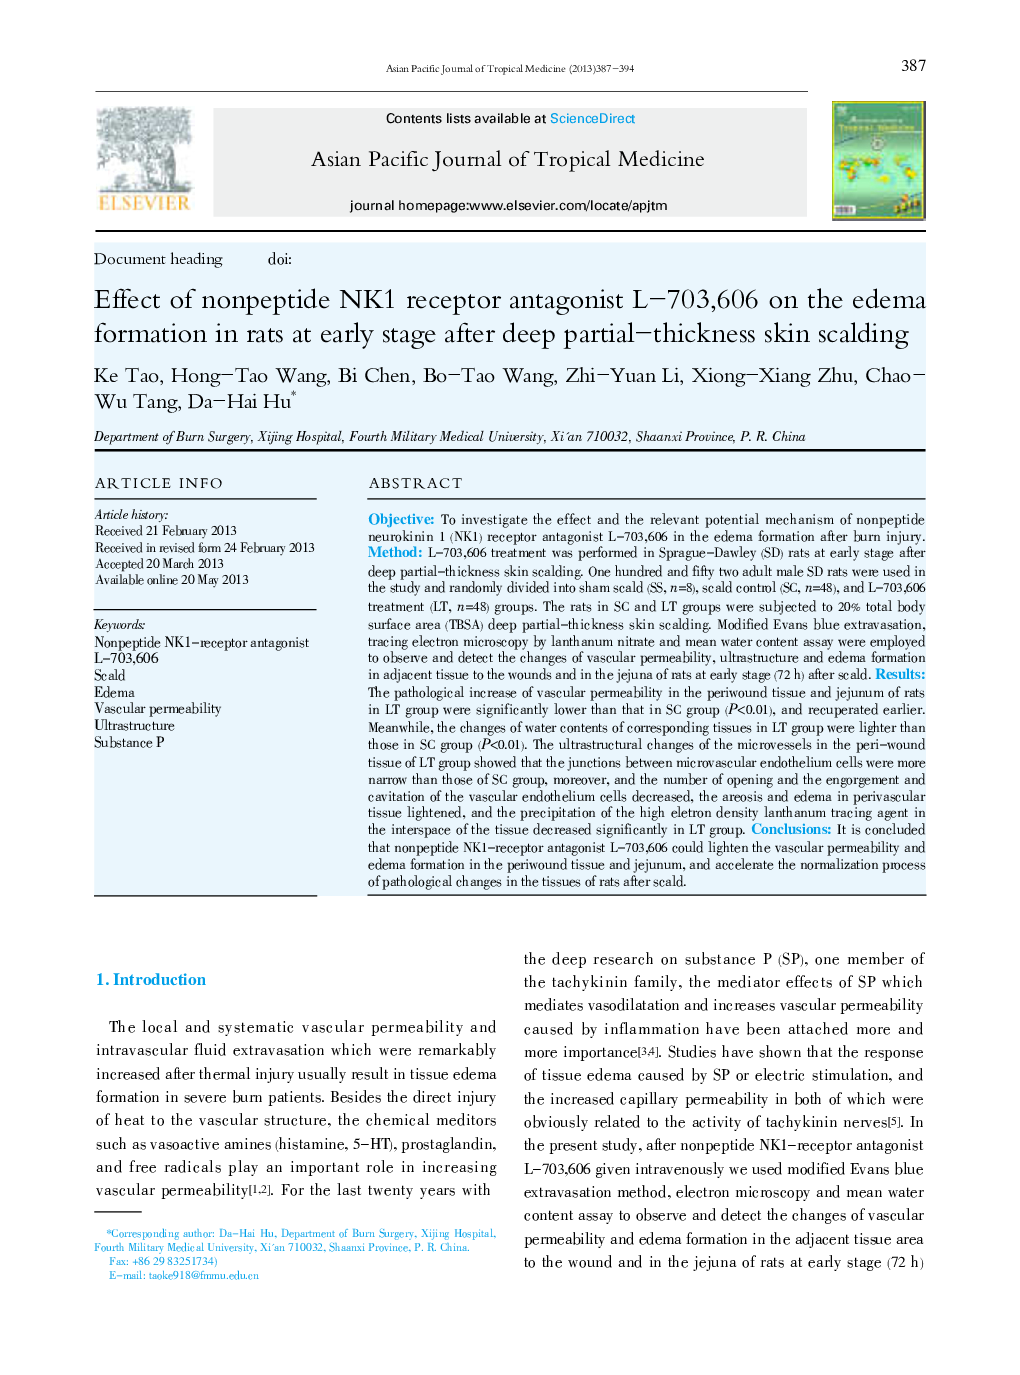 Effect of nonpeptide NK1 receptor antagonist L-703,606 on the edema formation in rats at early stage after deep partial-thickness skin scalding 